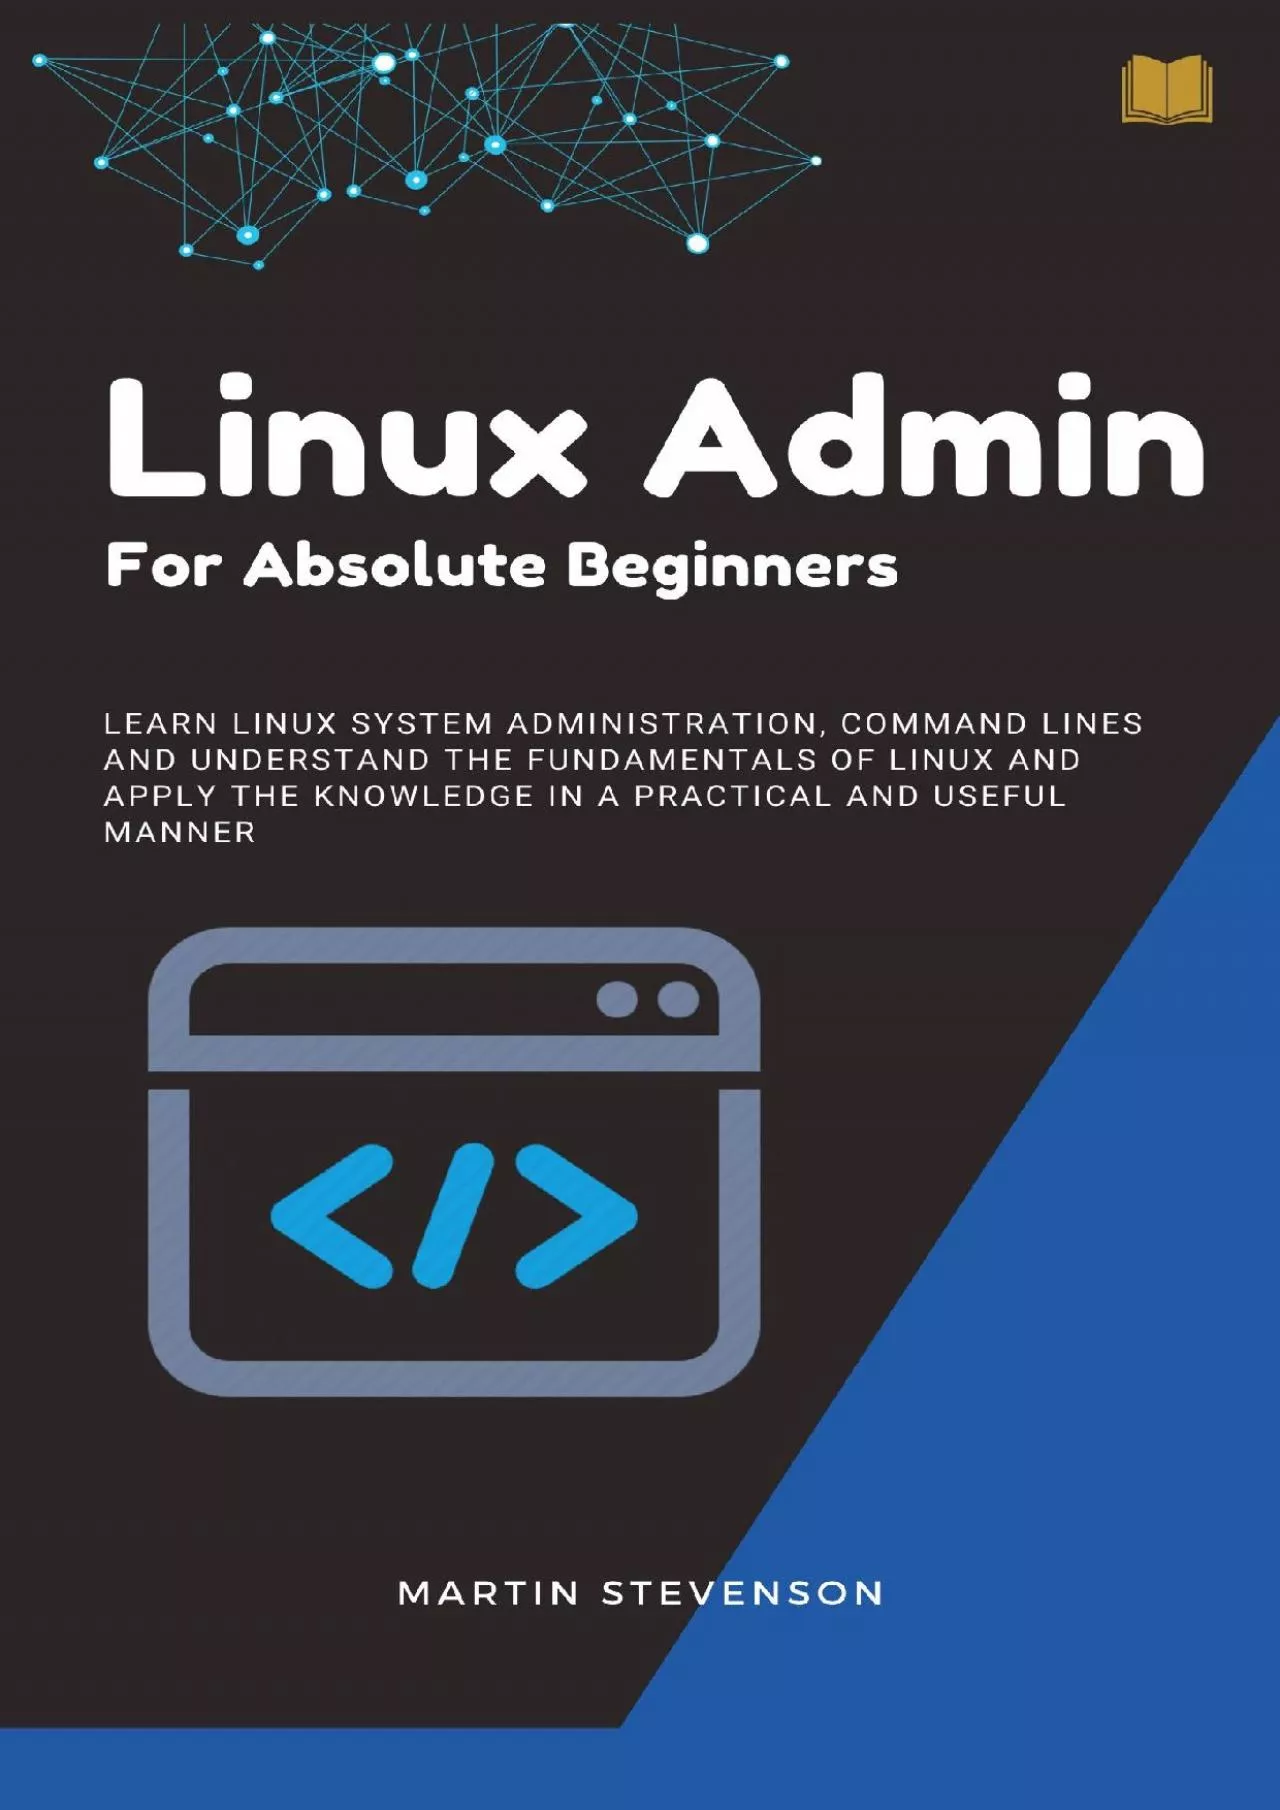 [eBOOK]-Linux: Linux Administration: Linux Admin for Absolute Beginners